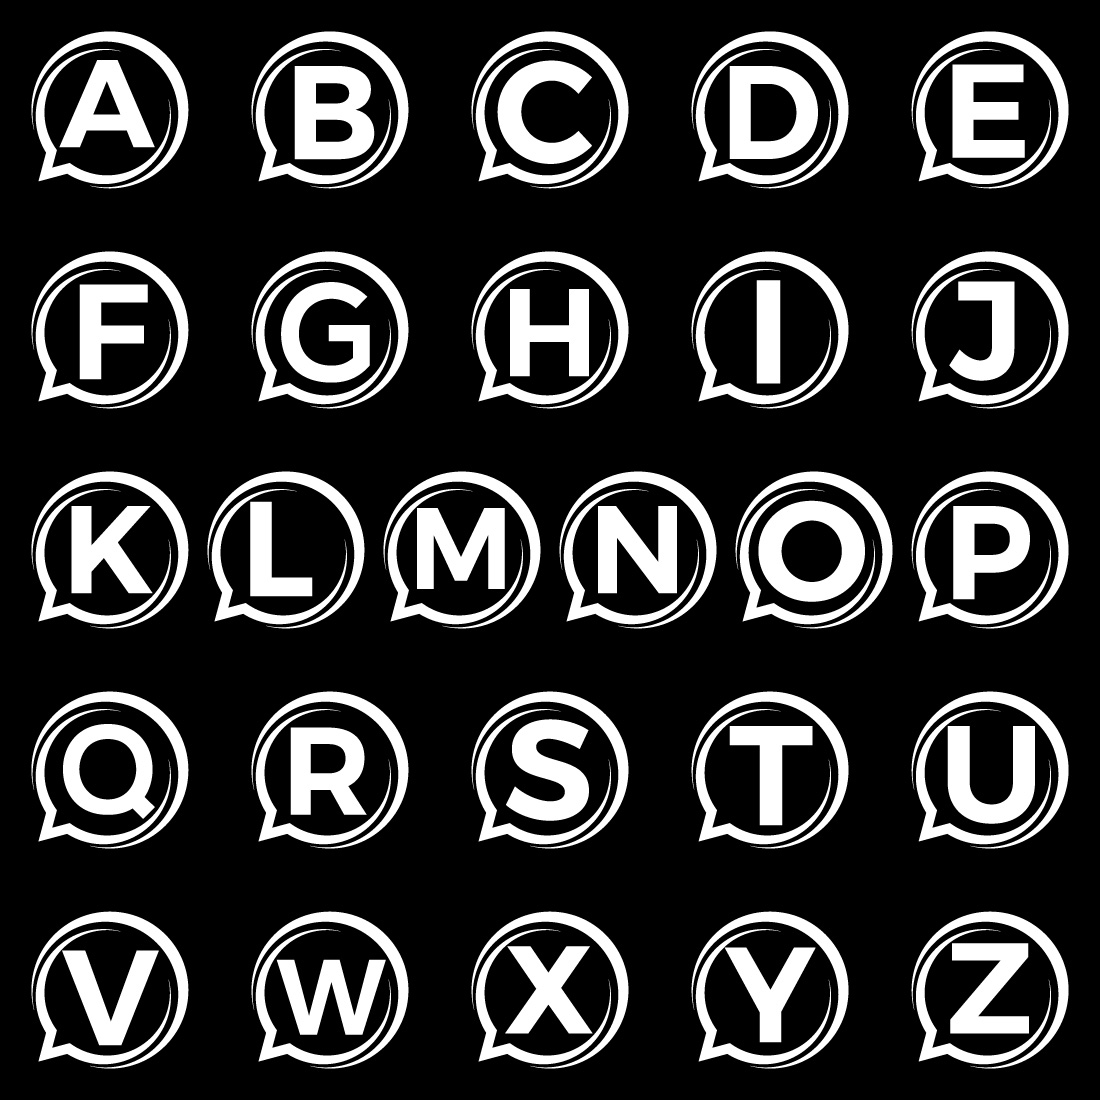 Initial A-Z monogram letter alphabet with a bubble chat icon. Talking chatting logo concept cover image.